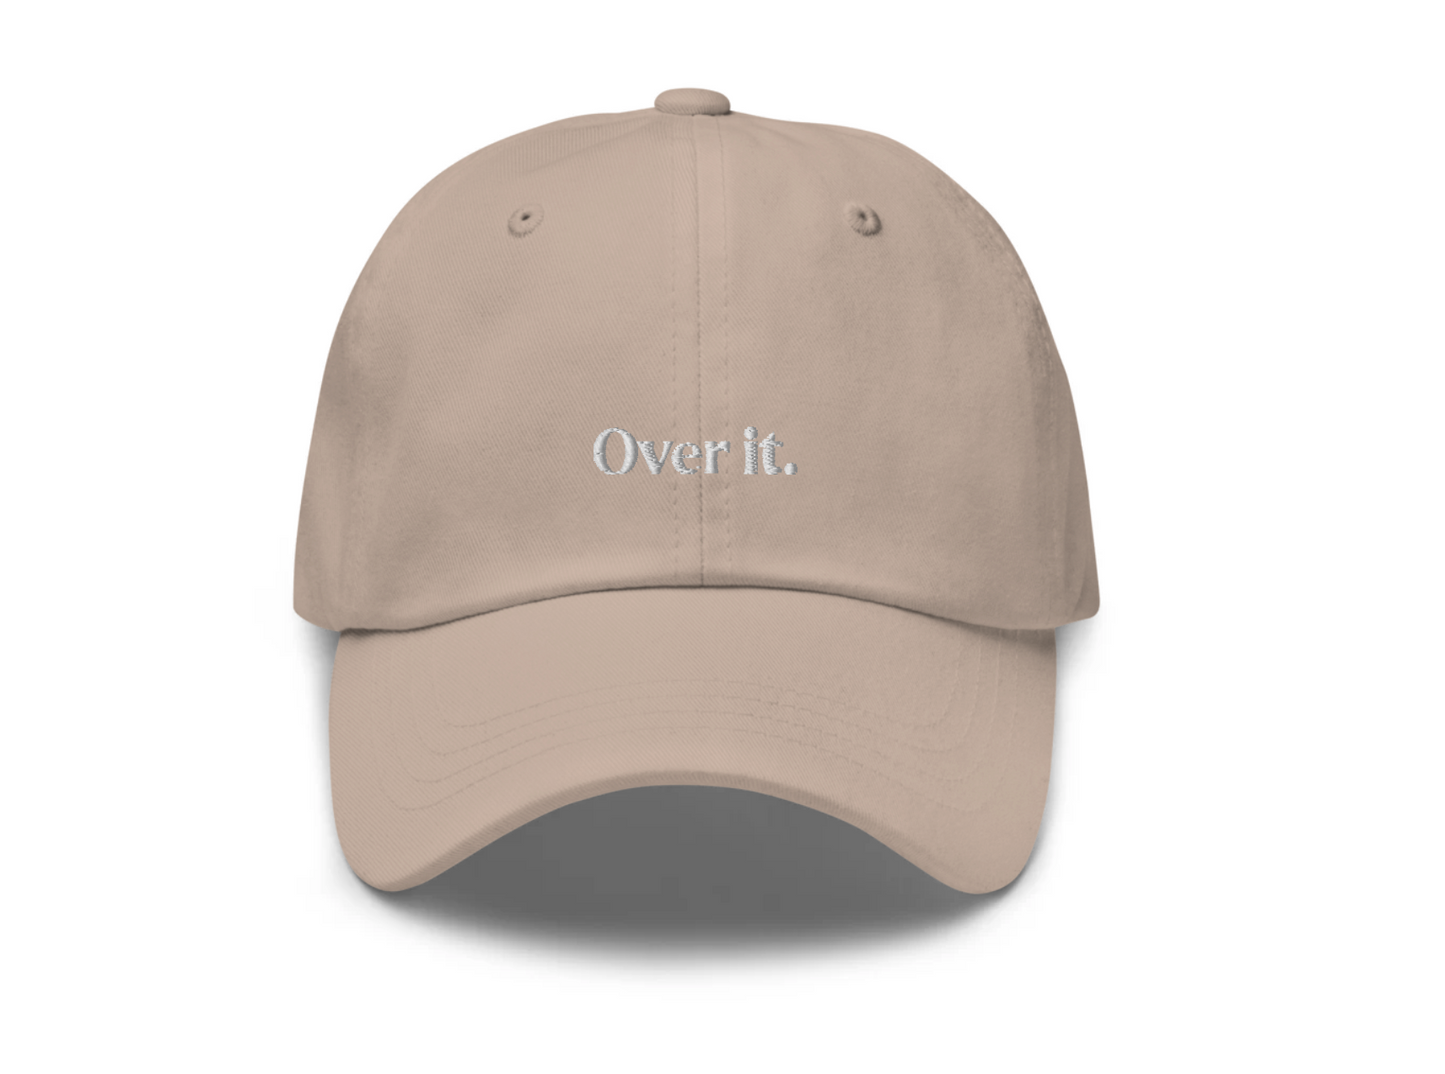 Over It. Dad Hat (2 colors available)